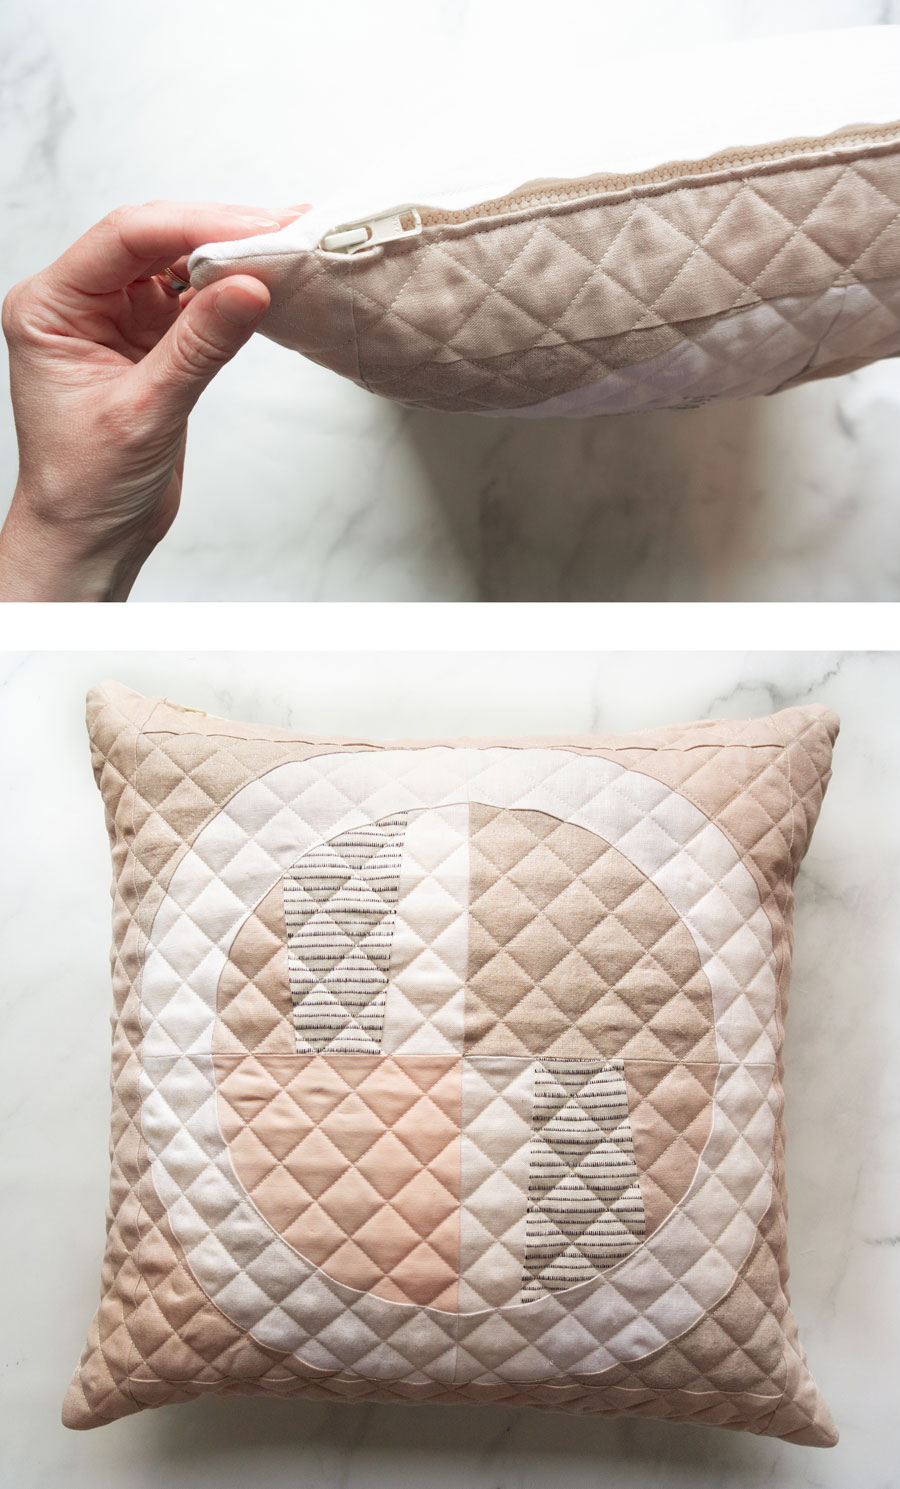 Sew a quilted zipper pillow with this step by step tutorial. I'll walk you through how to baste and quilt your pillow top, sew a zipper, and finish the pillow beautifully!